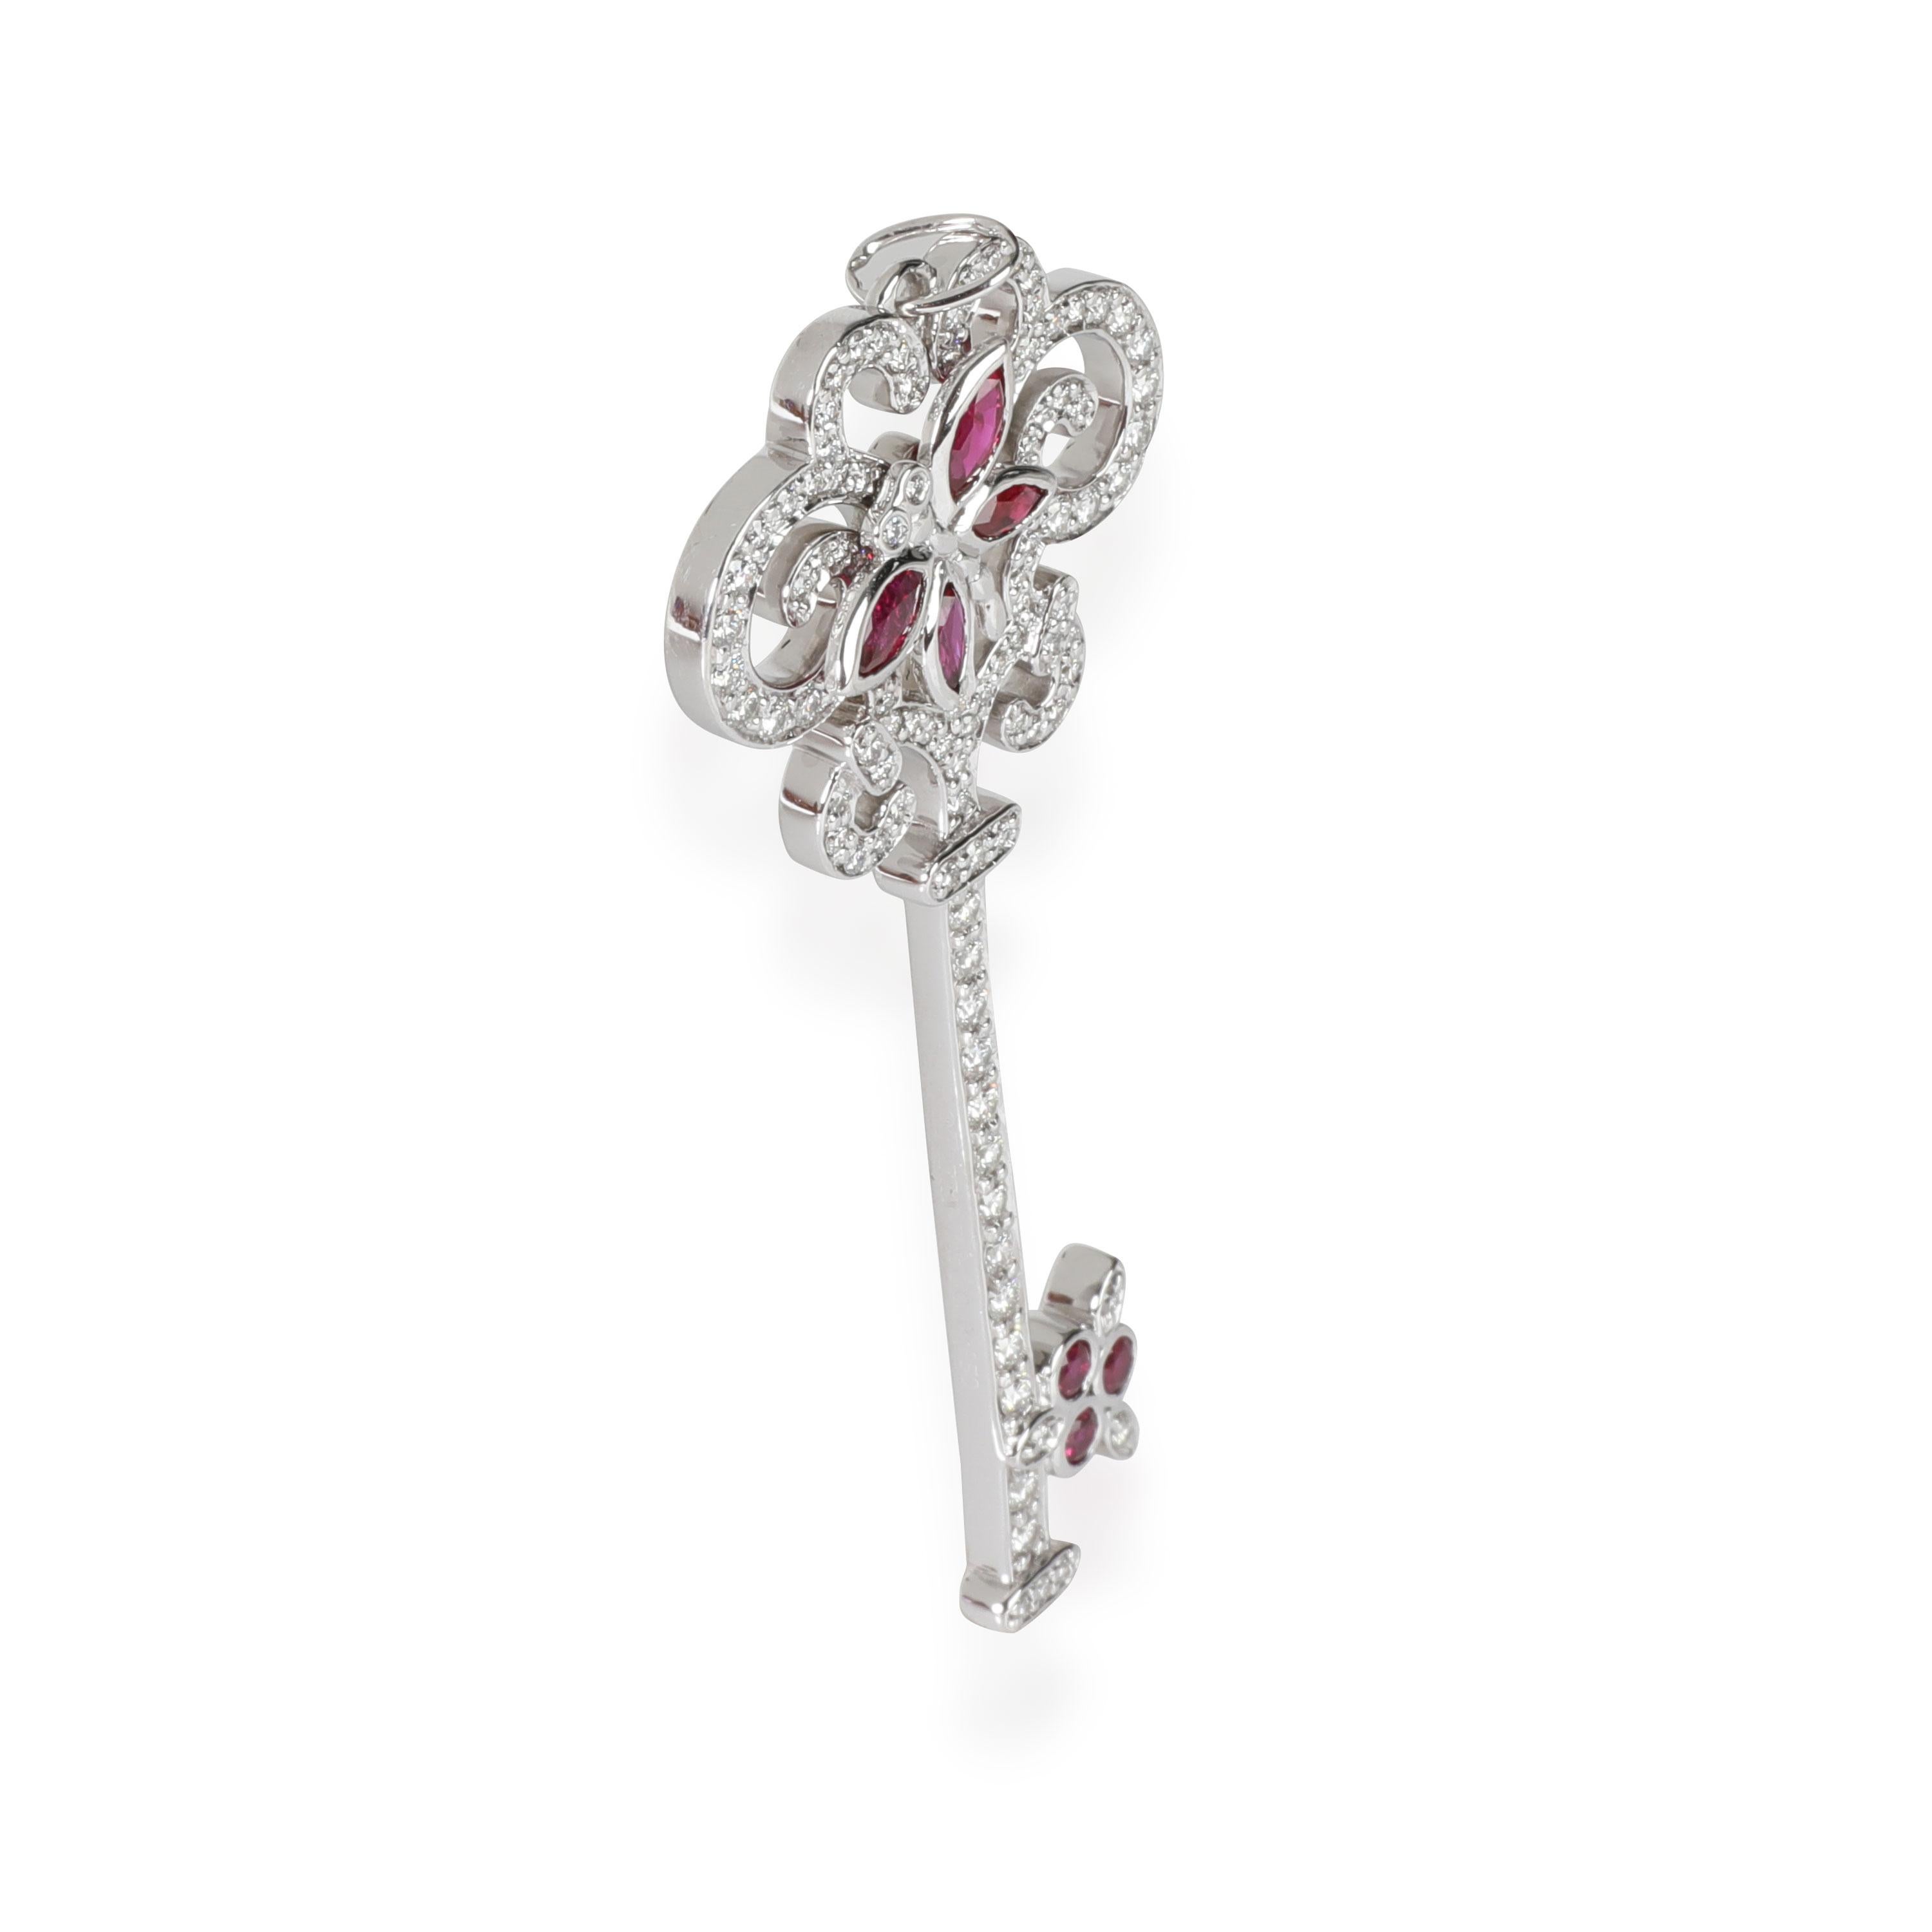 Tiffany & Co. Keys Ruby Diamond Enchant Dragonfly Pendant in Platinum

PRIMARY DETAILS
SKU: 114152
Listing Title: Tiffany & Co. Keys Ruby Diamond Enchant Dragonfly Pendant in Platinum
Condition Description: Length is 2.25 inches (including the